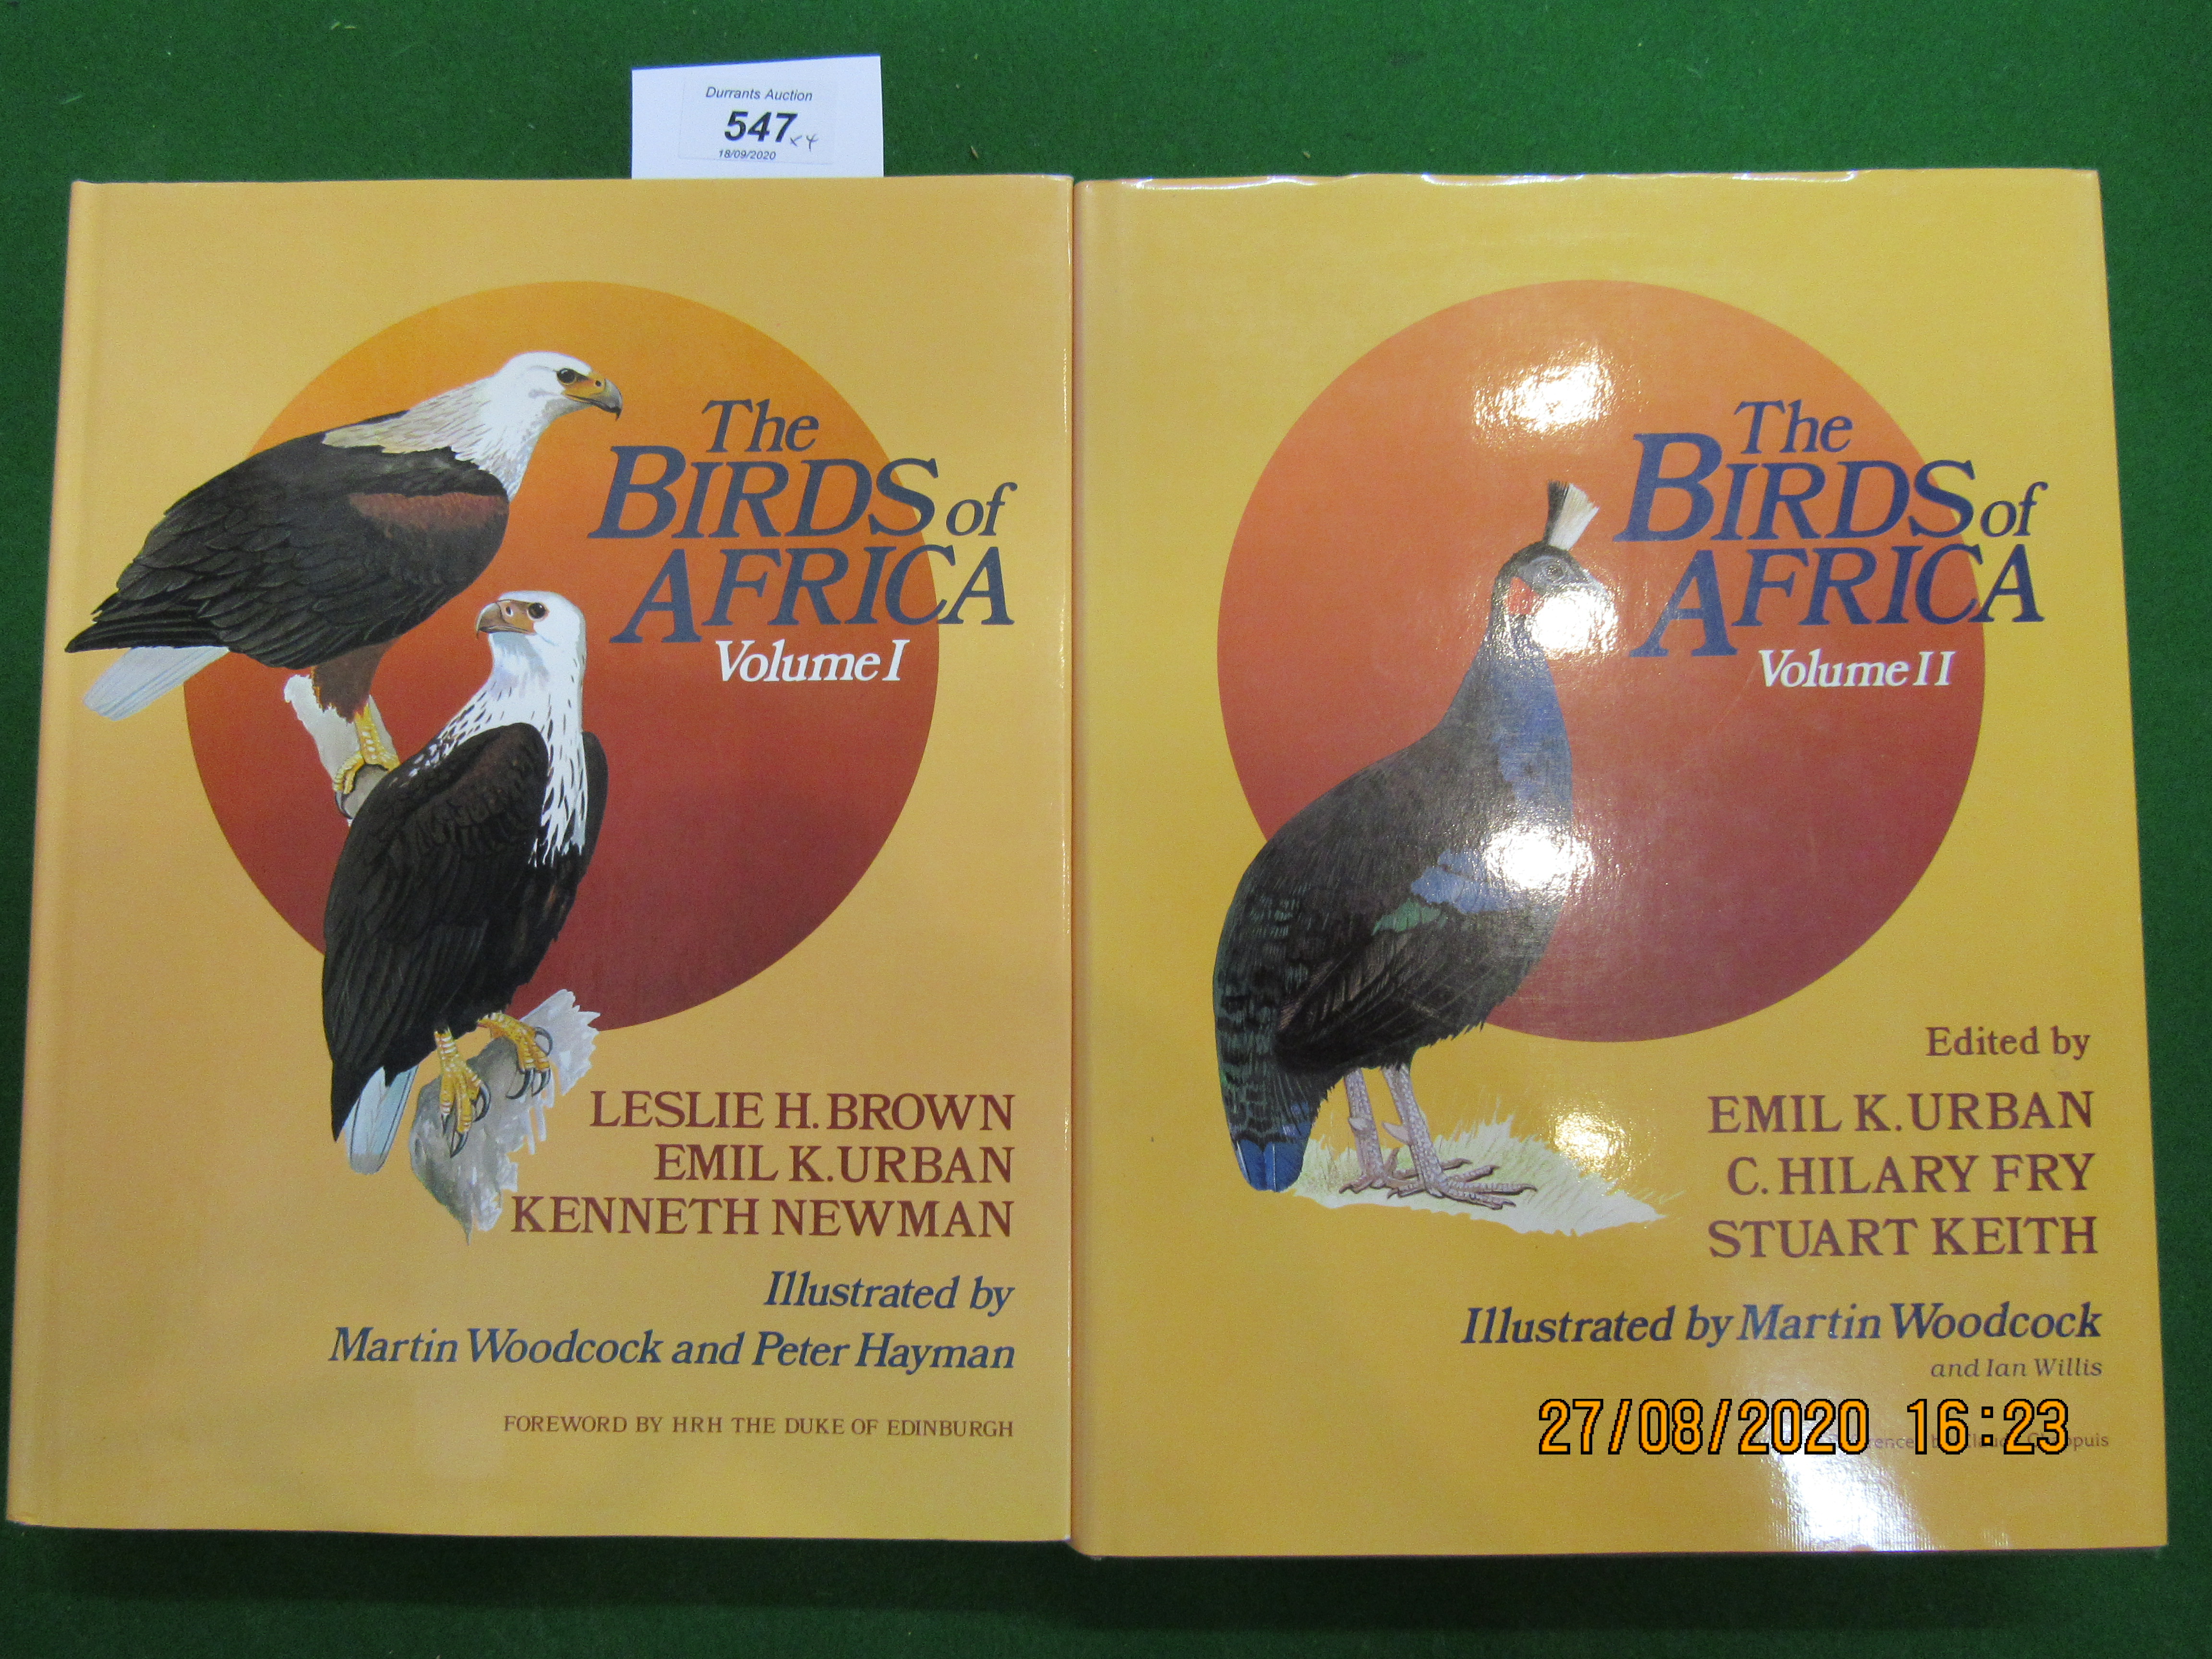 "The Birds of Africa", volumes one to four, published by Academic Press, 1982, 1986,